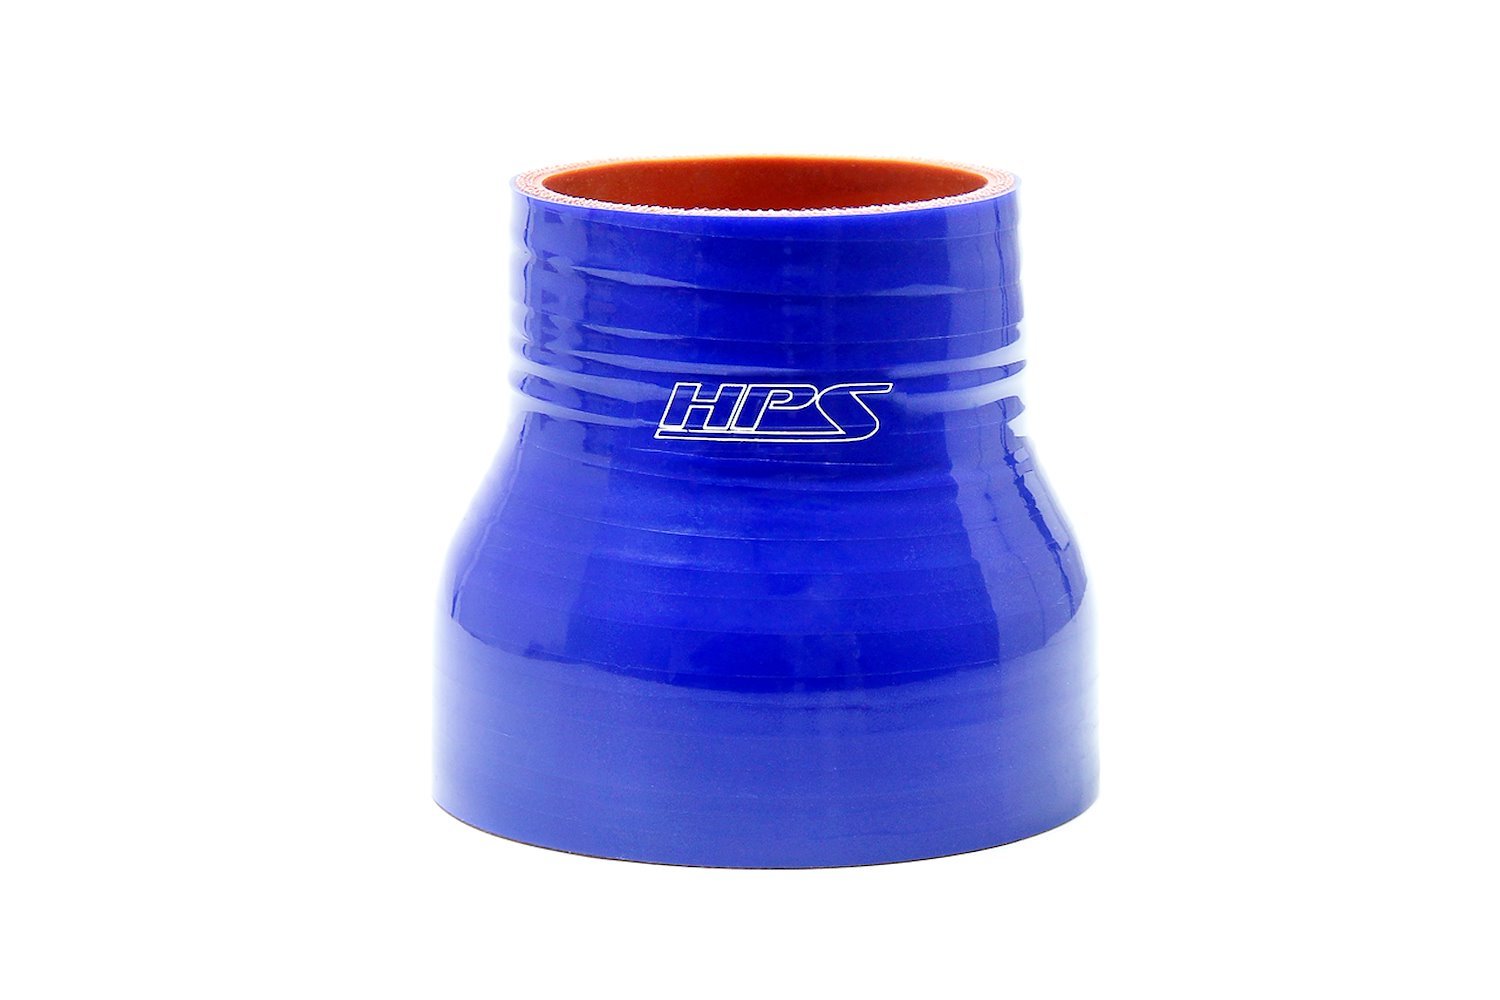 HTSR-238-300-BLUE Silicone Reducer Hose, High-Temp 4-Ply Reinforced, 2-3/8 in. - 3 in. ID, 3 in. Long, Blue